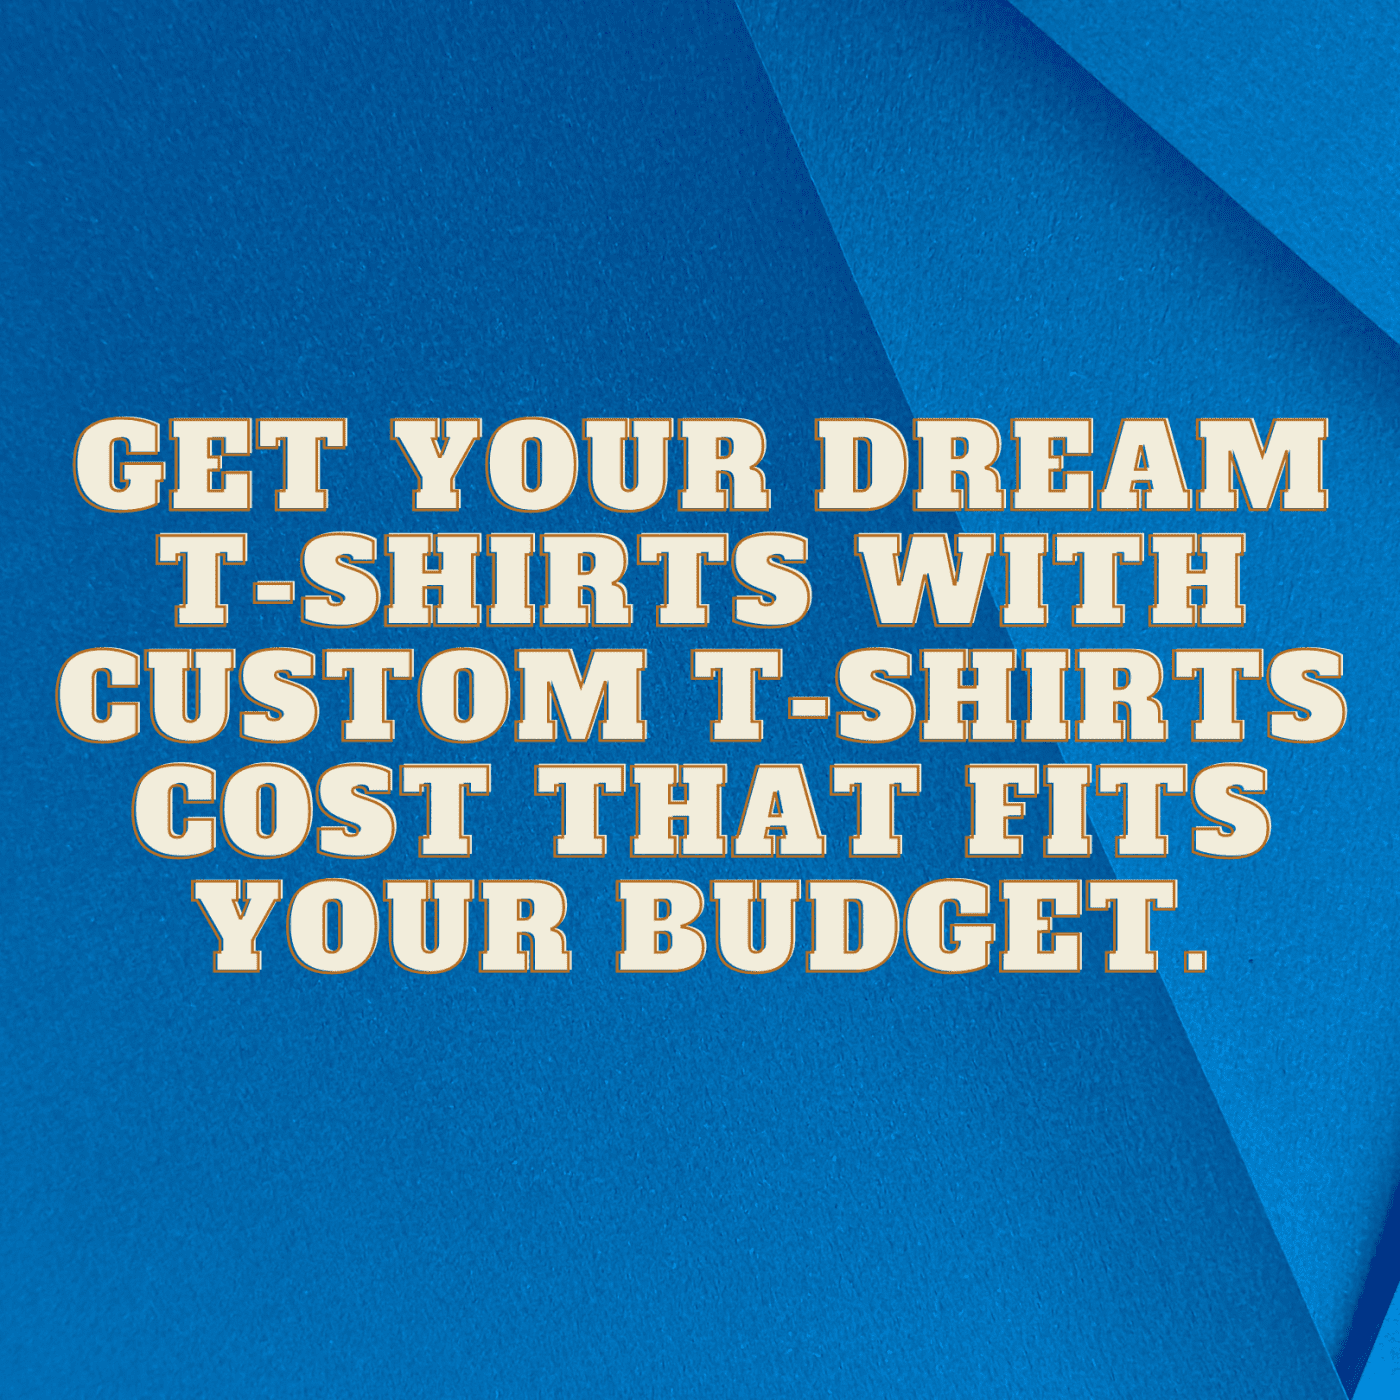 Get Your Dream T-Shirts with Custom T-Shirts Cost That Fits Your Budget.